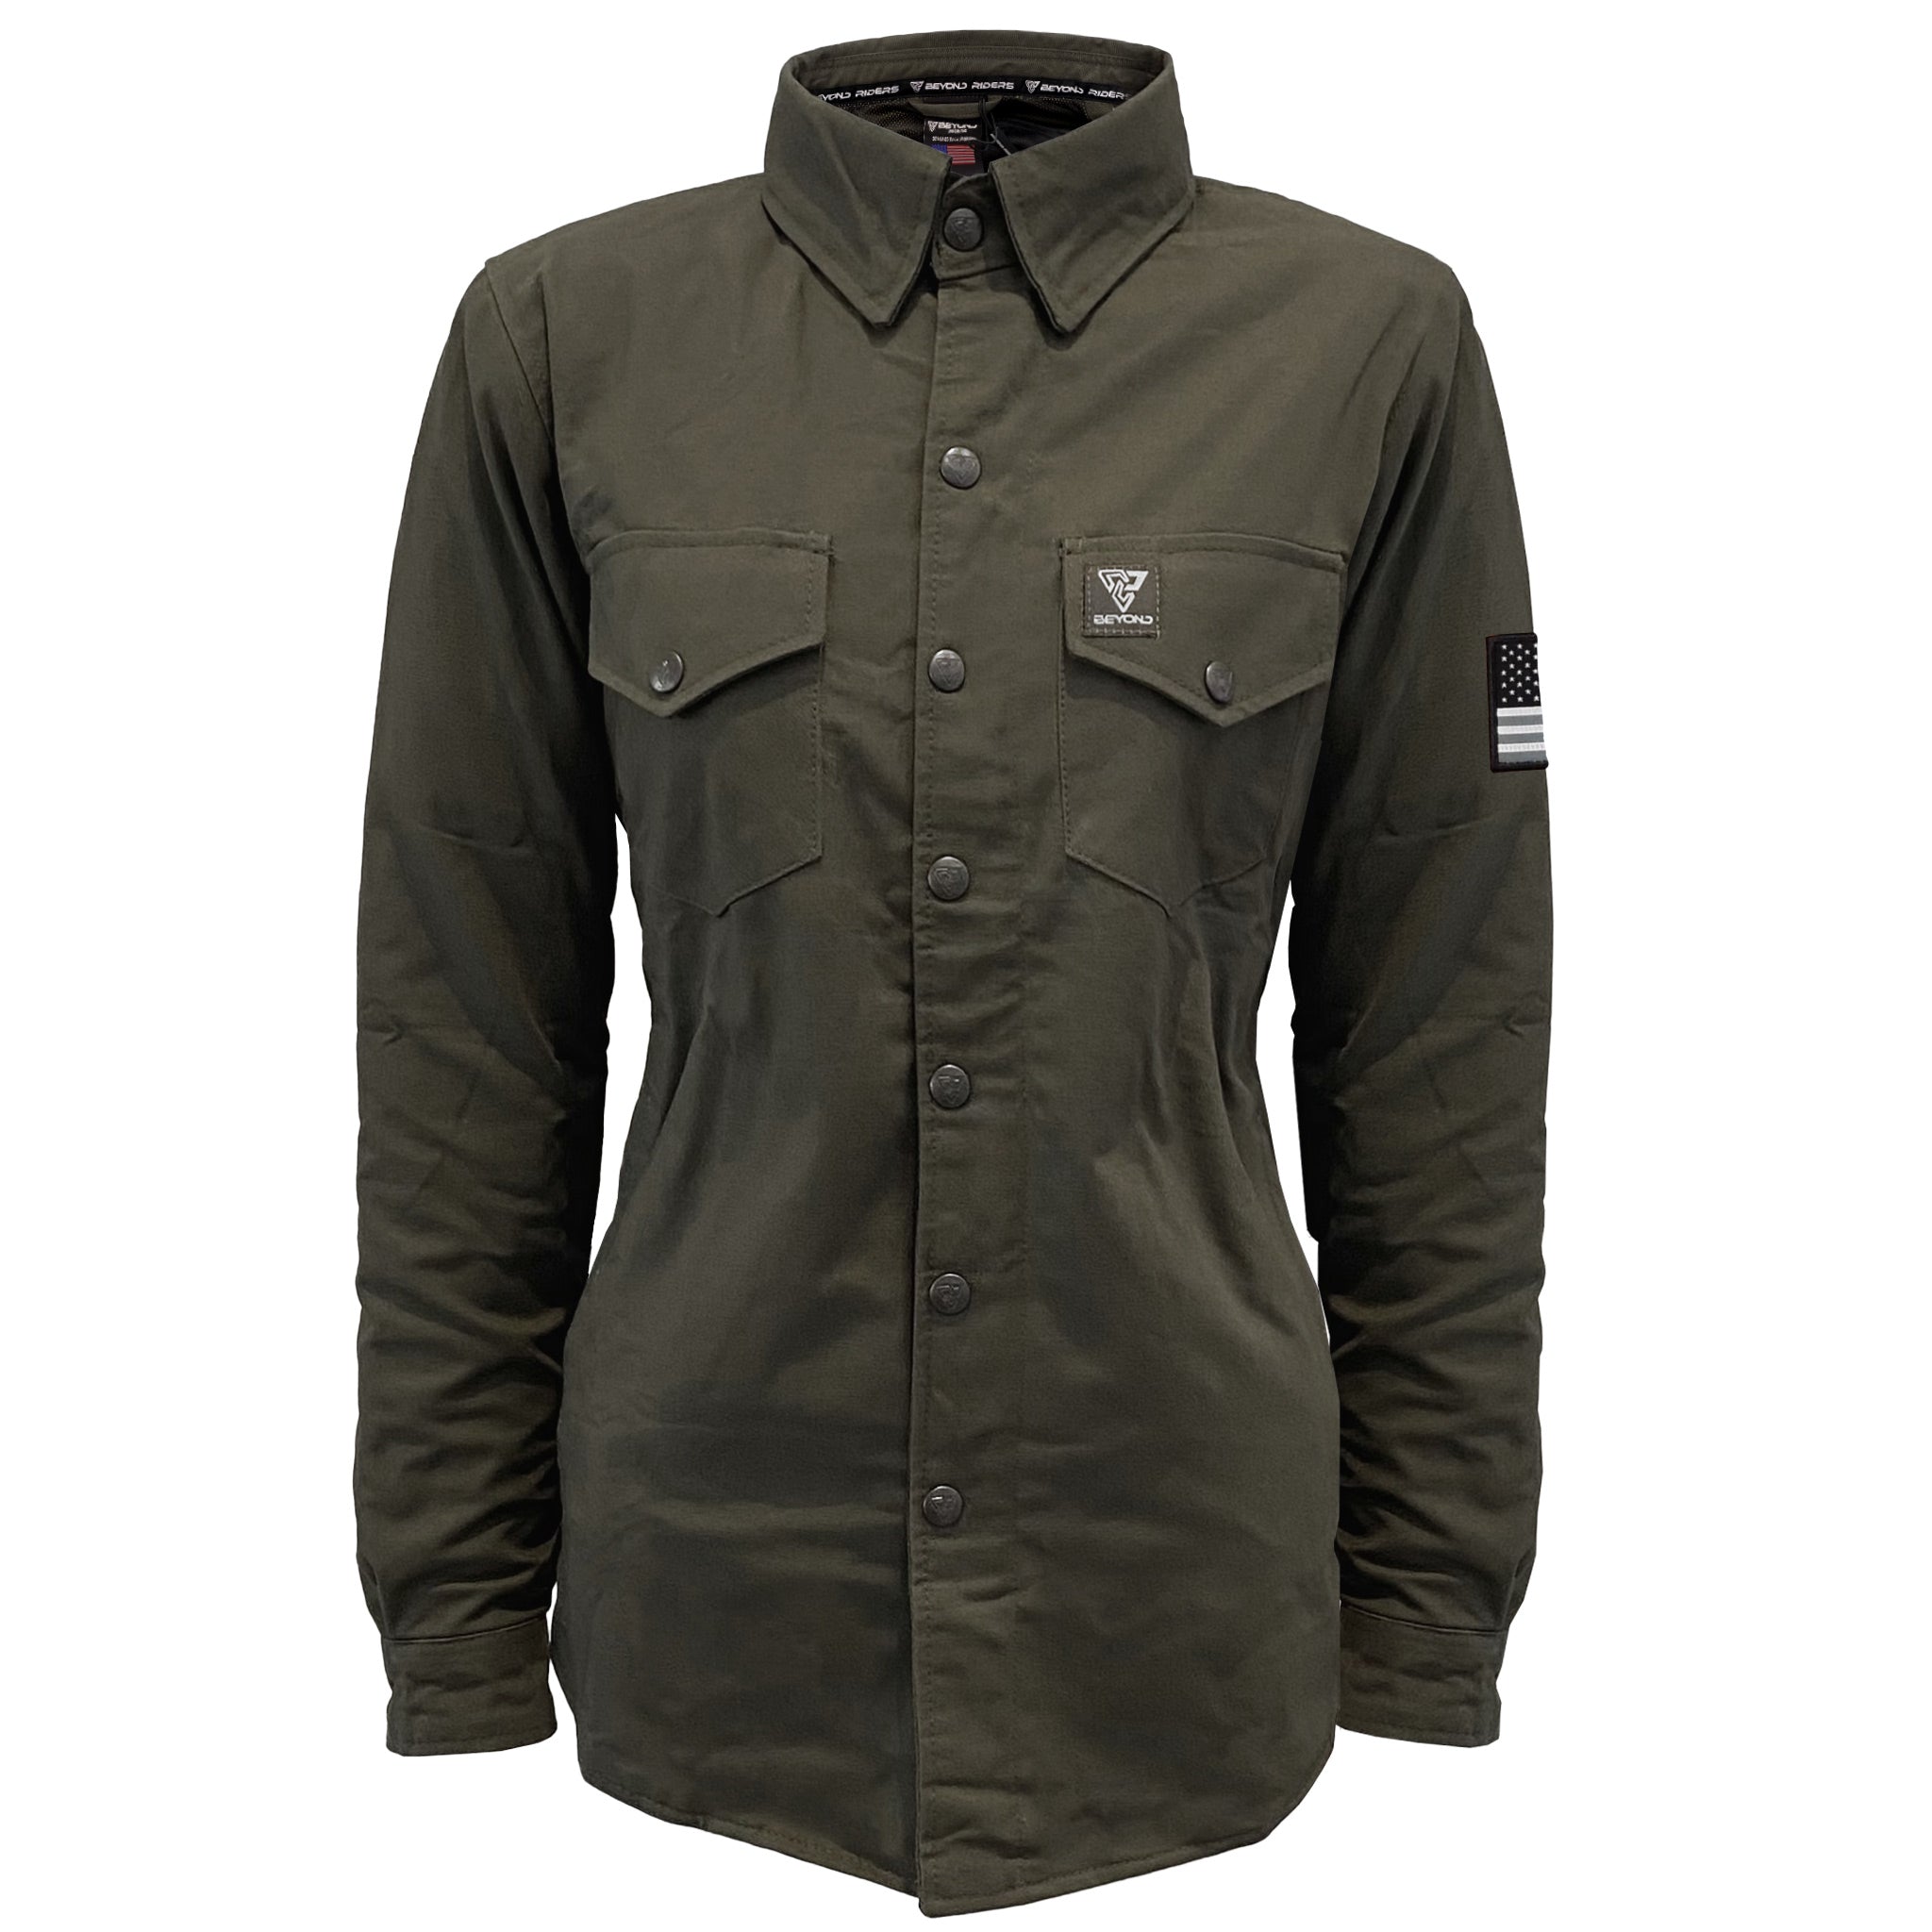 Protective Canvas Jacket for Women - Army Green with Pads